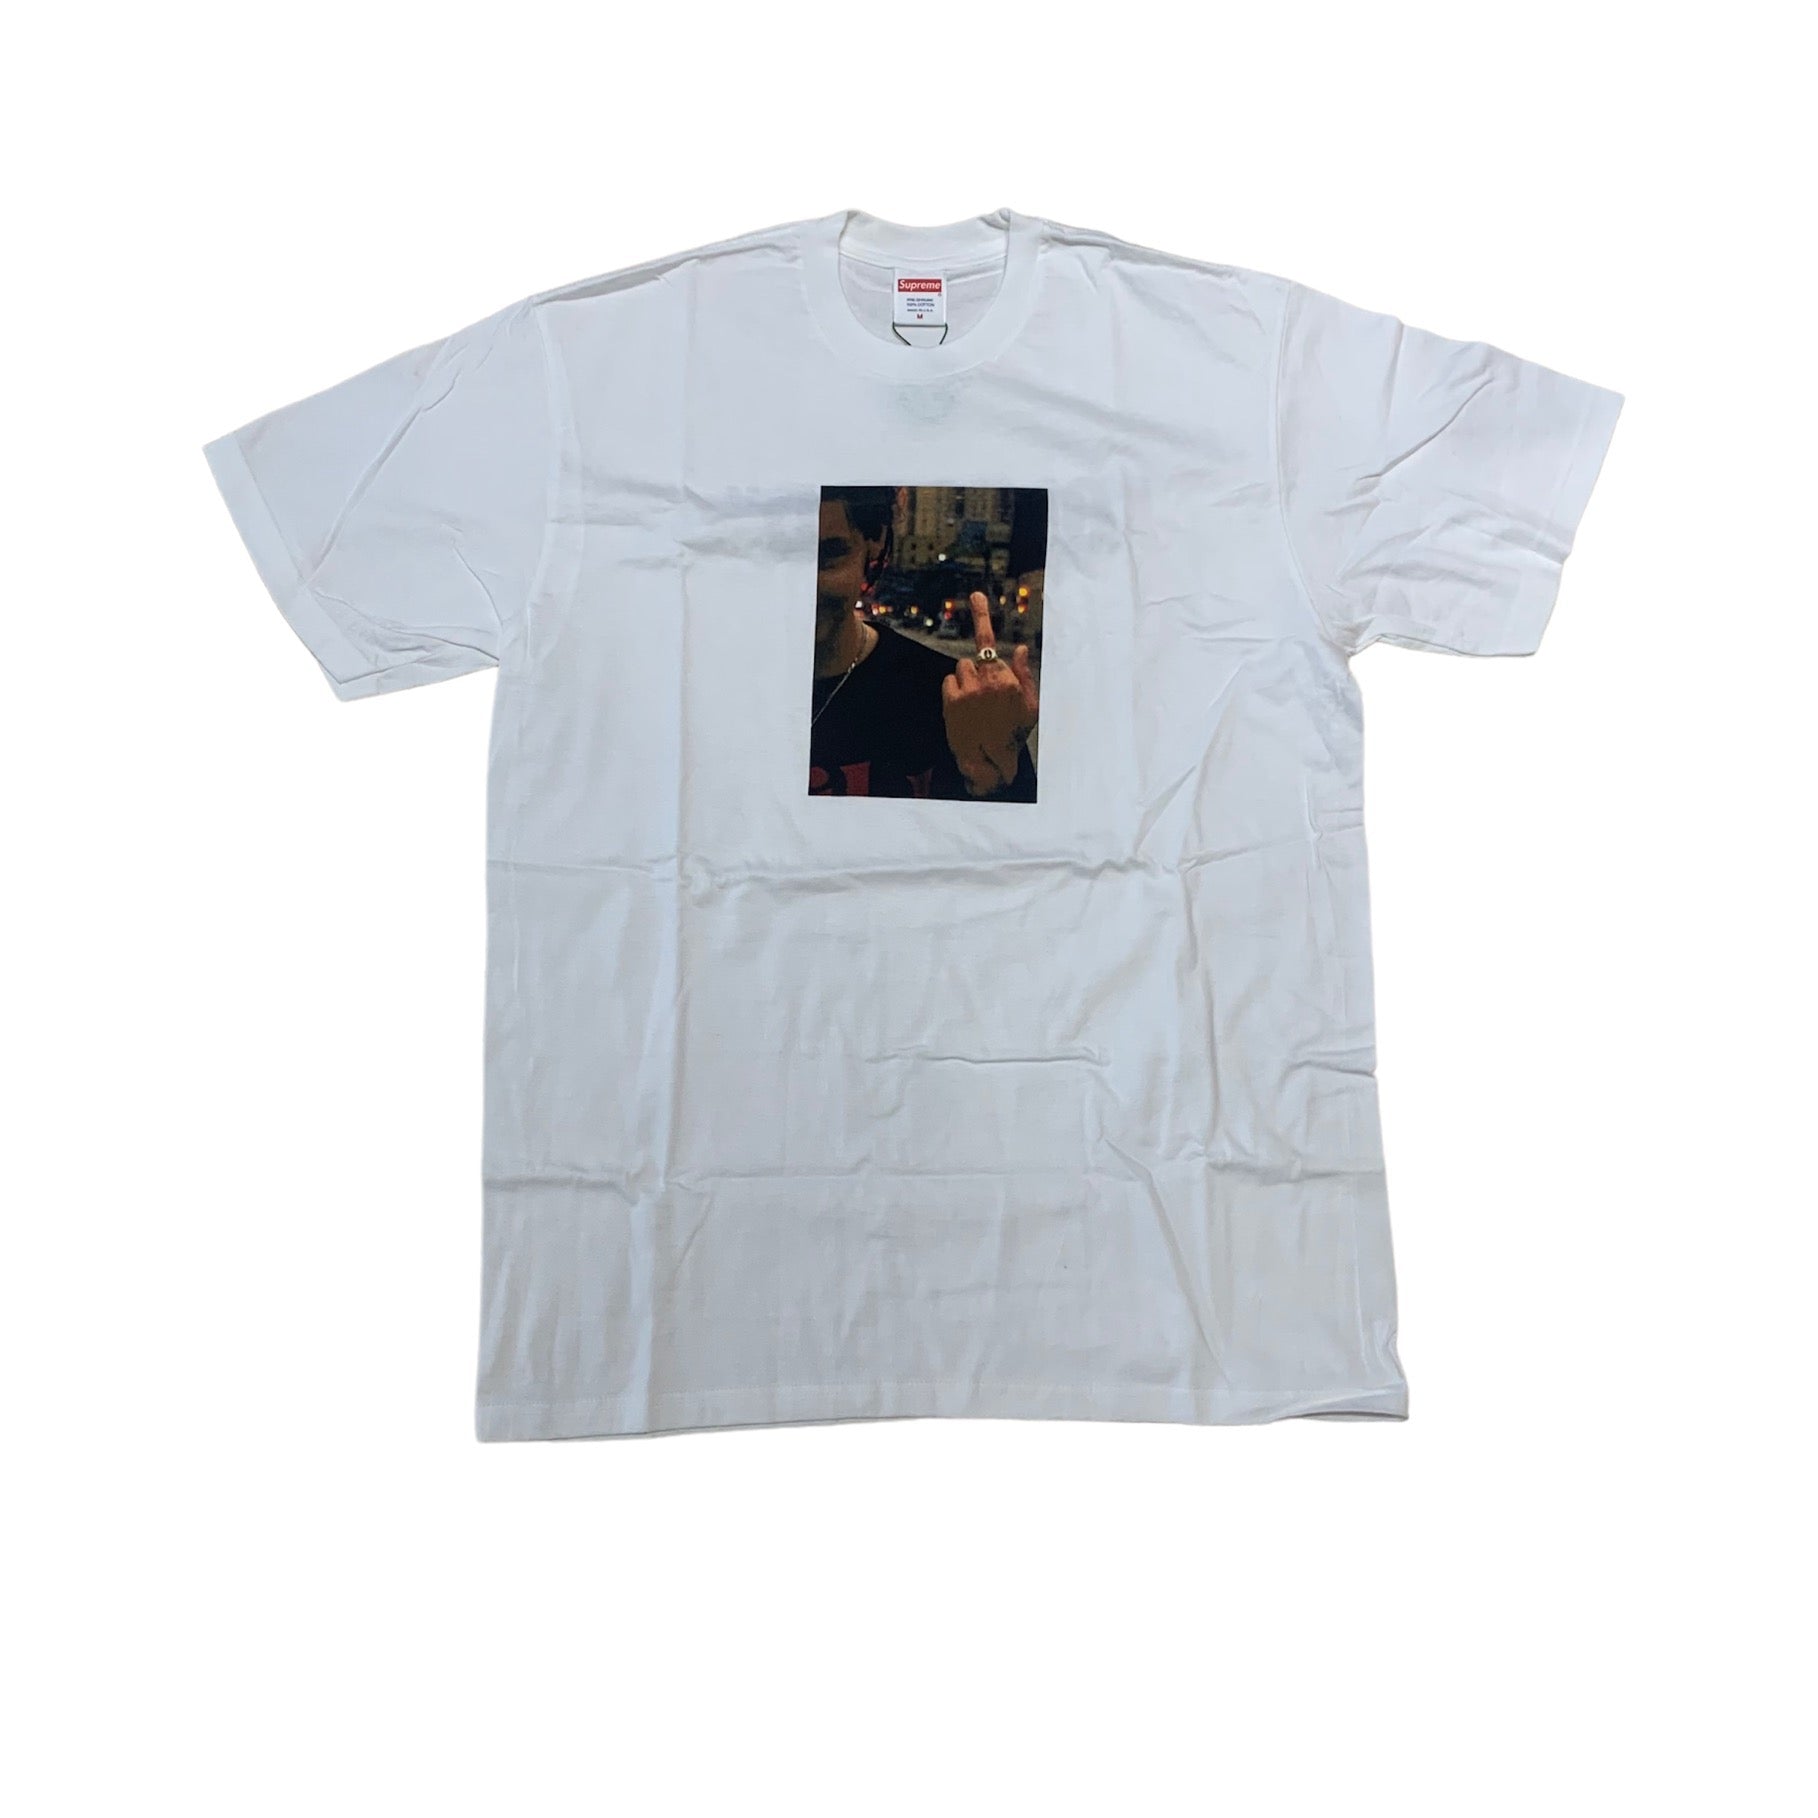 SUPREME “BLESSED” TEE - WHITE